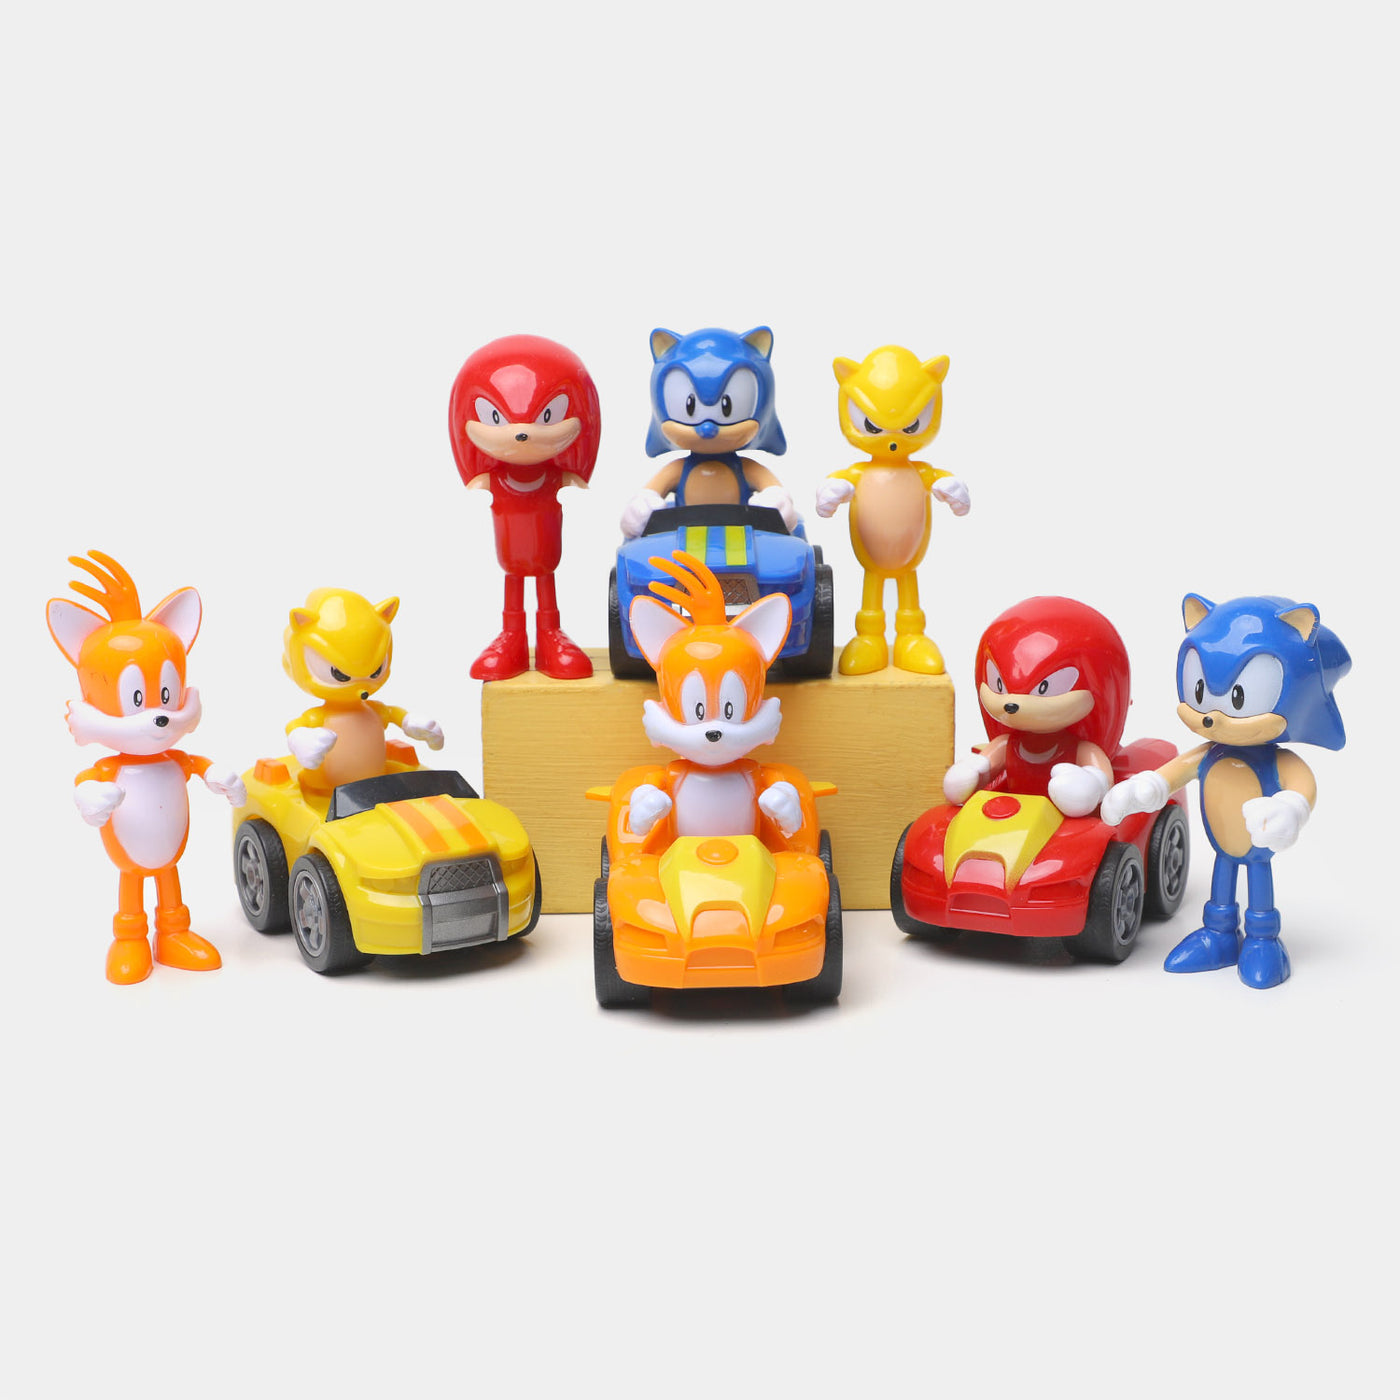 Racing Car 8PCs With Characters Toys For kids